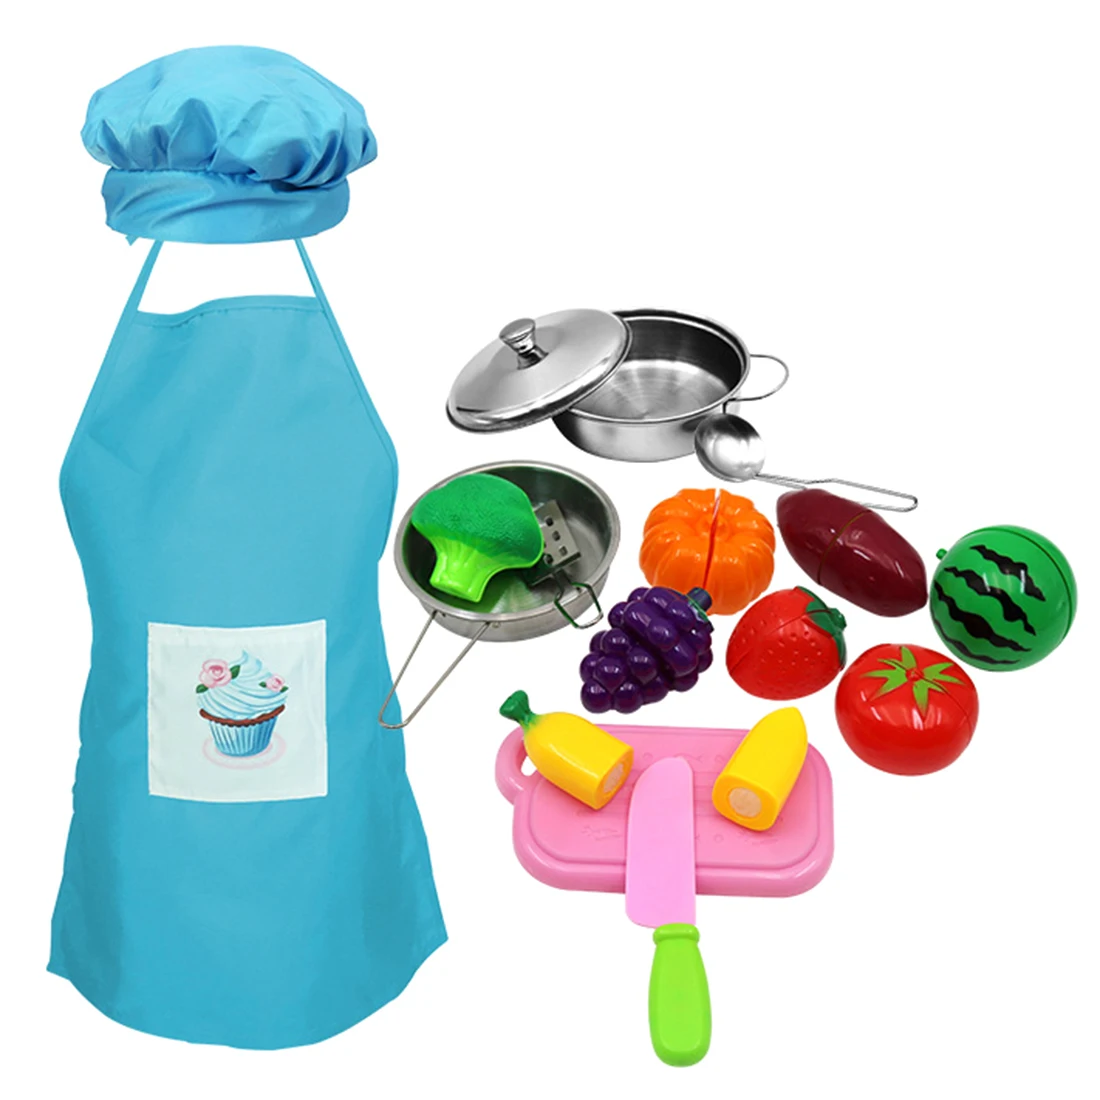 24Pcs Children Stainless Steel Pretend Kitchen Cooking Utensils Cookware Playset With Apron And Hat Education Toy Gift For Kids - Цвет: Синий